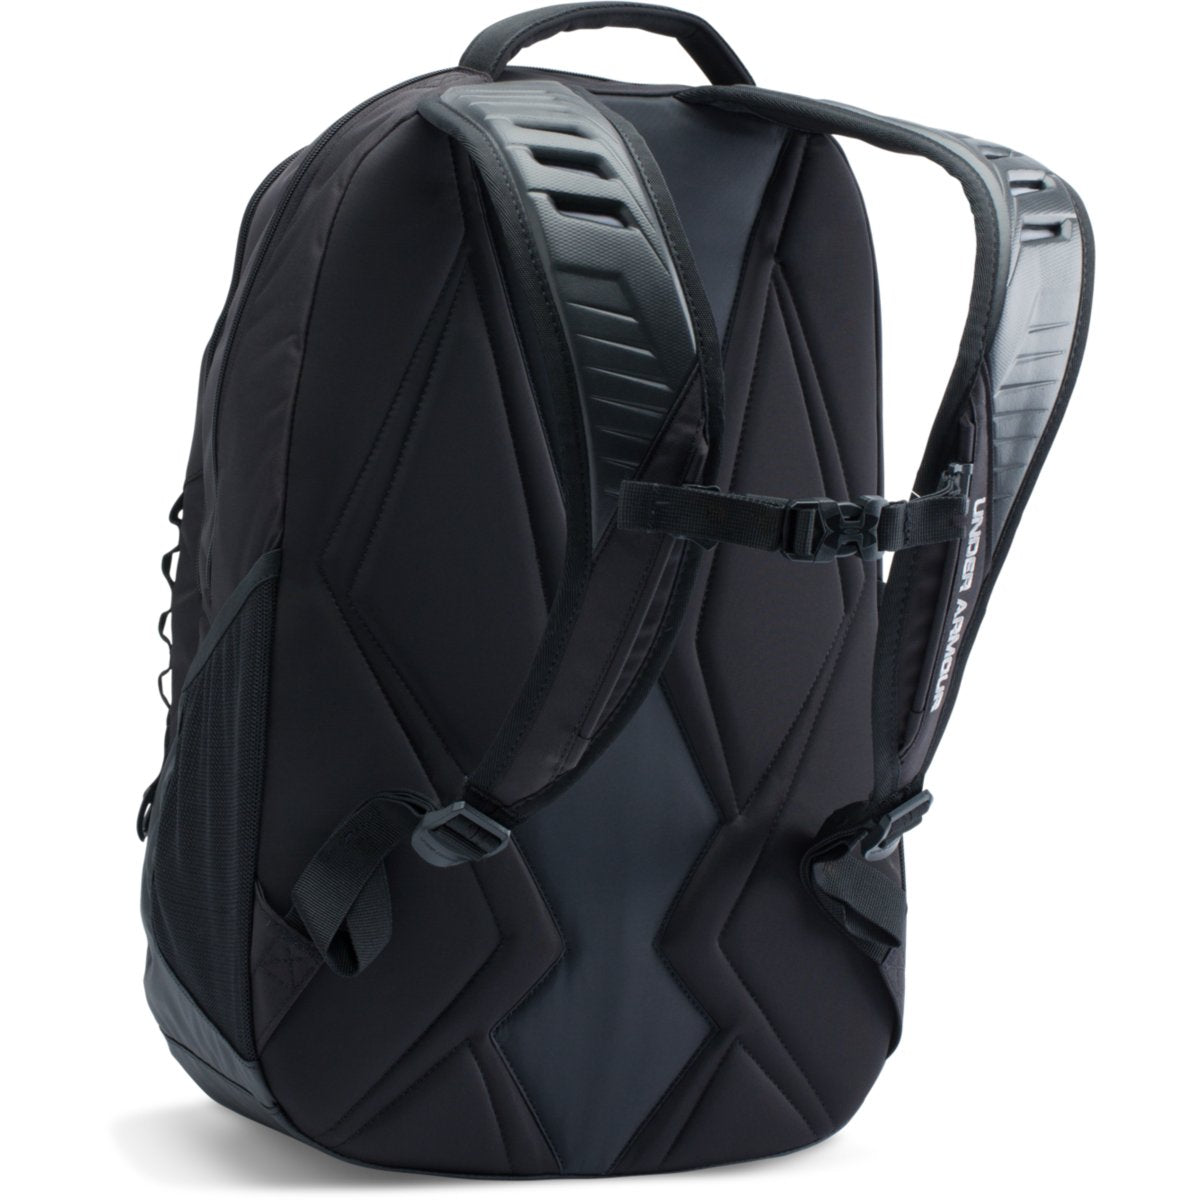 Under Armour Storm Backpack for Boys $29.99(reg. $44.99) + Free Shipping!